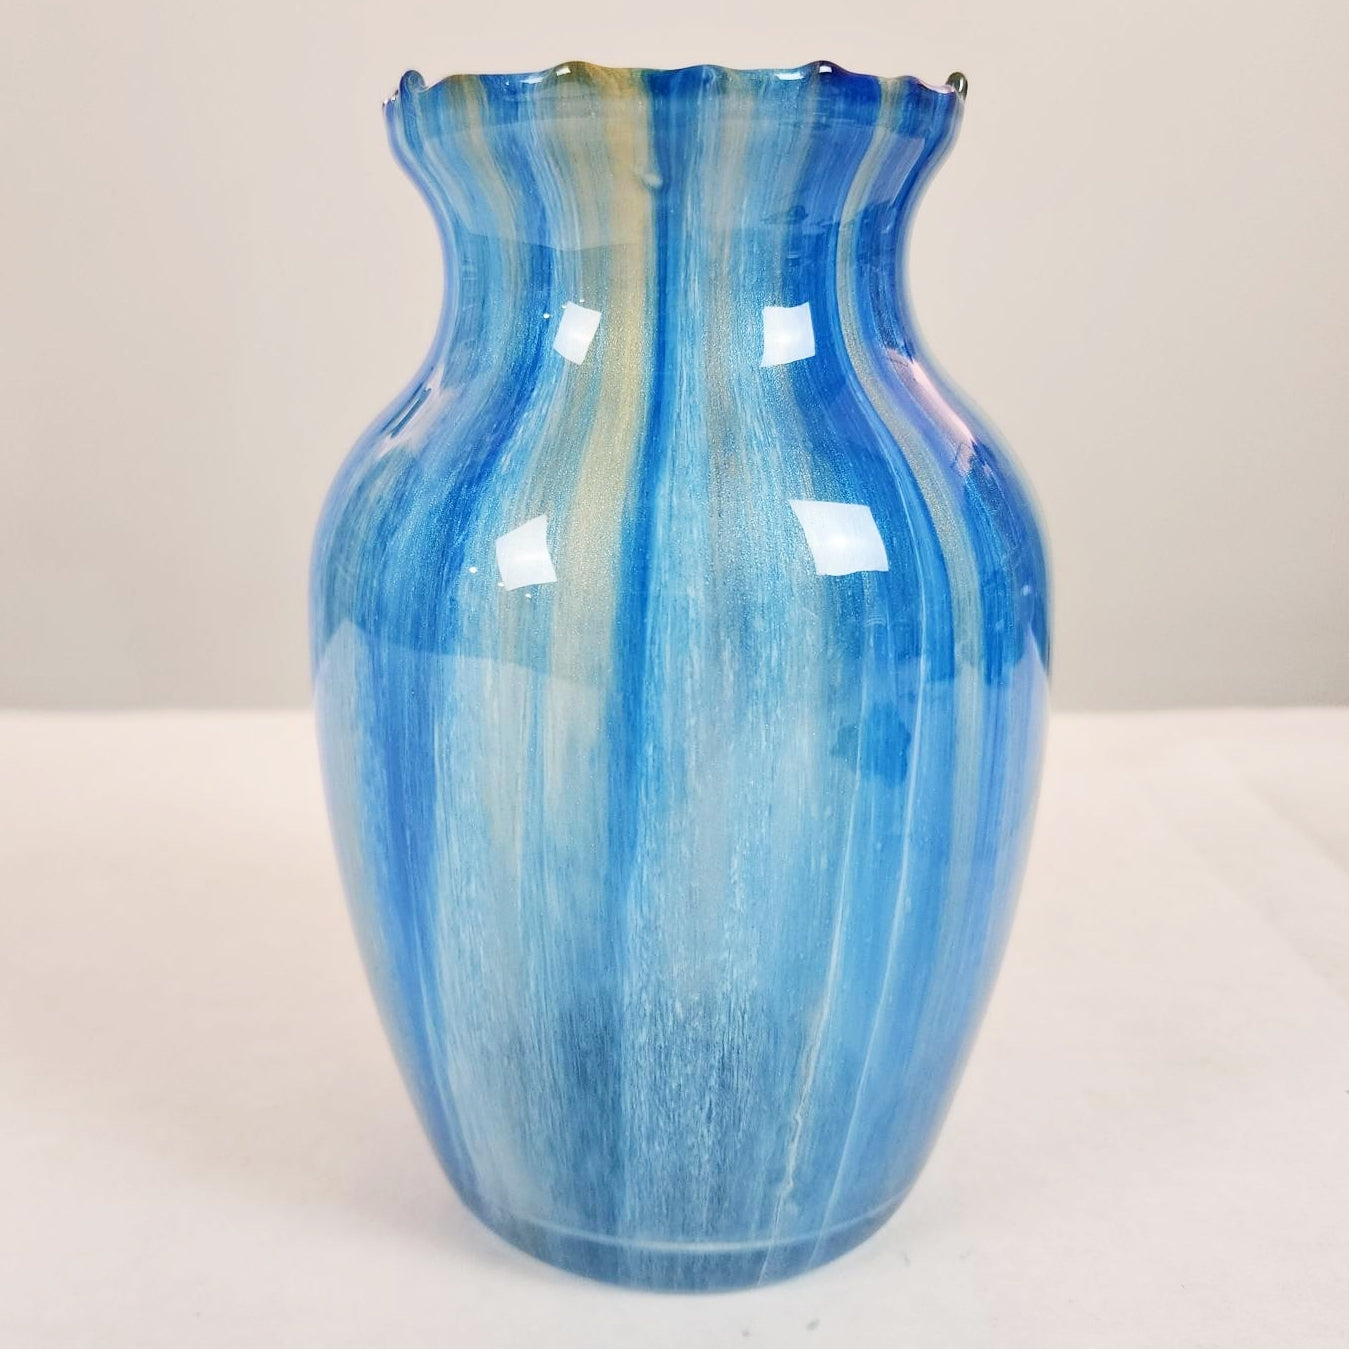 Resin Vase and Bowl Kit and Class